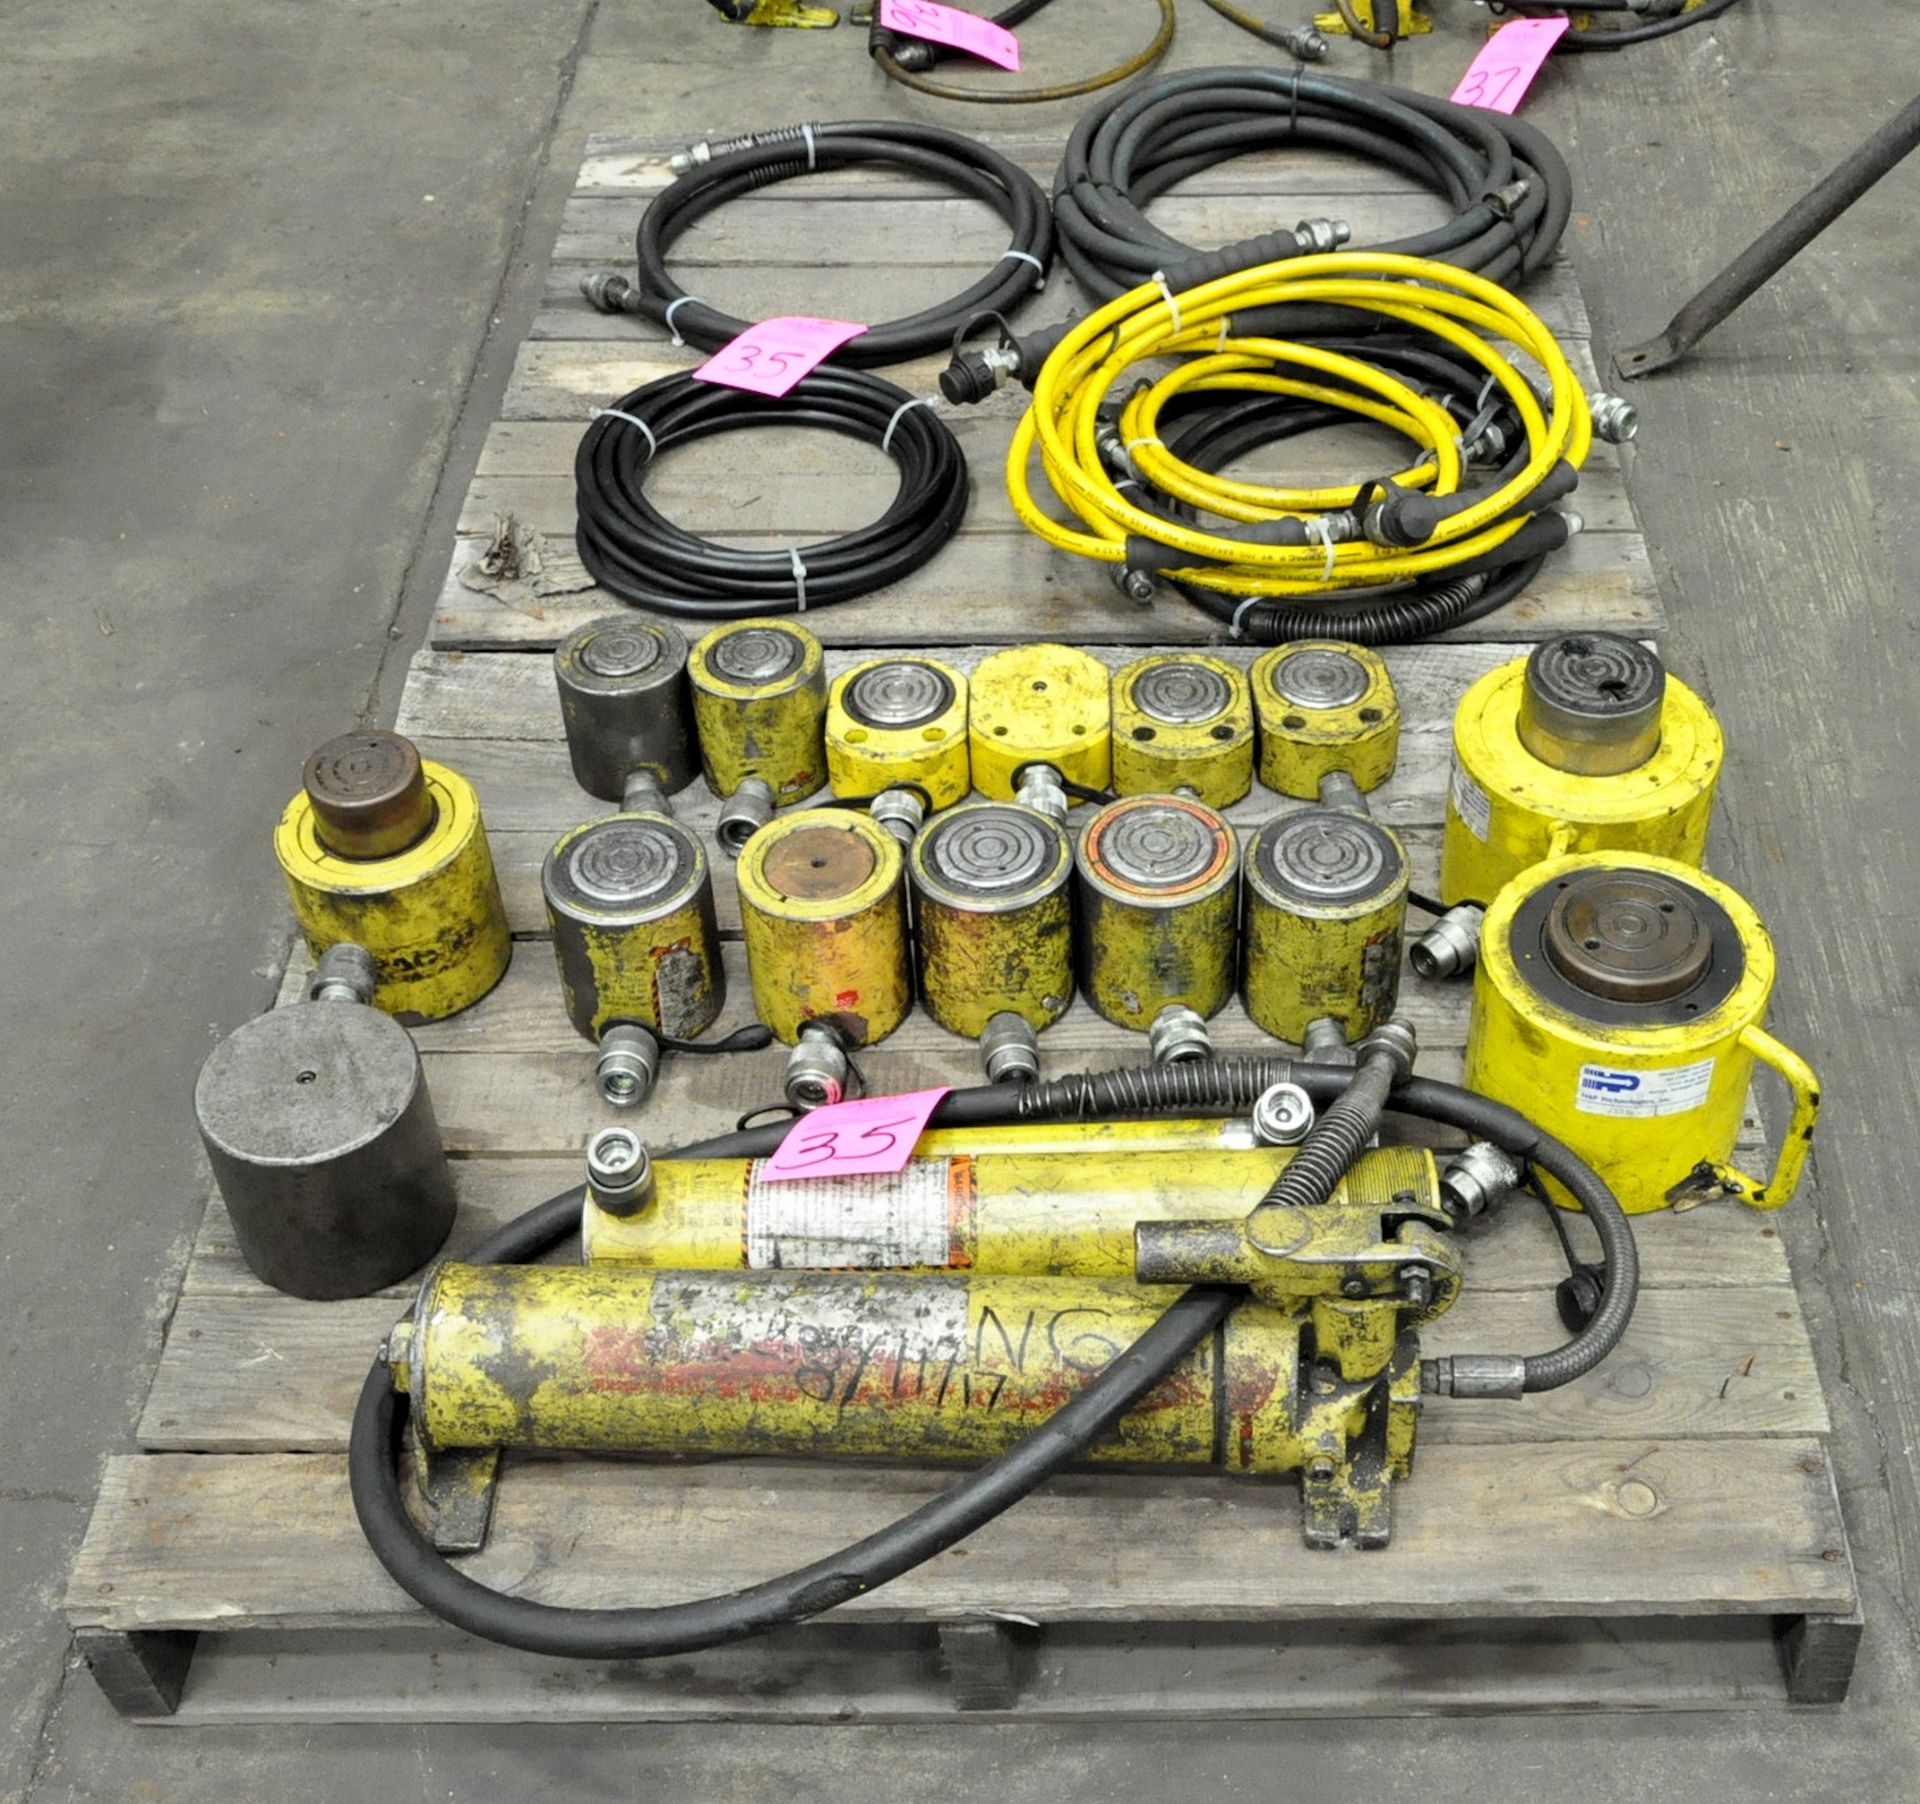 Lot-(2) Enerpac Hydraulic Pumps with Asst'd Cylinders and Hoses on (2) Pallets